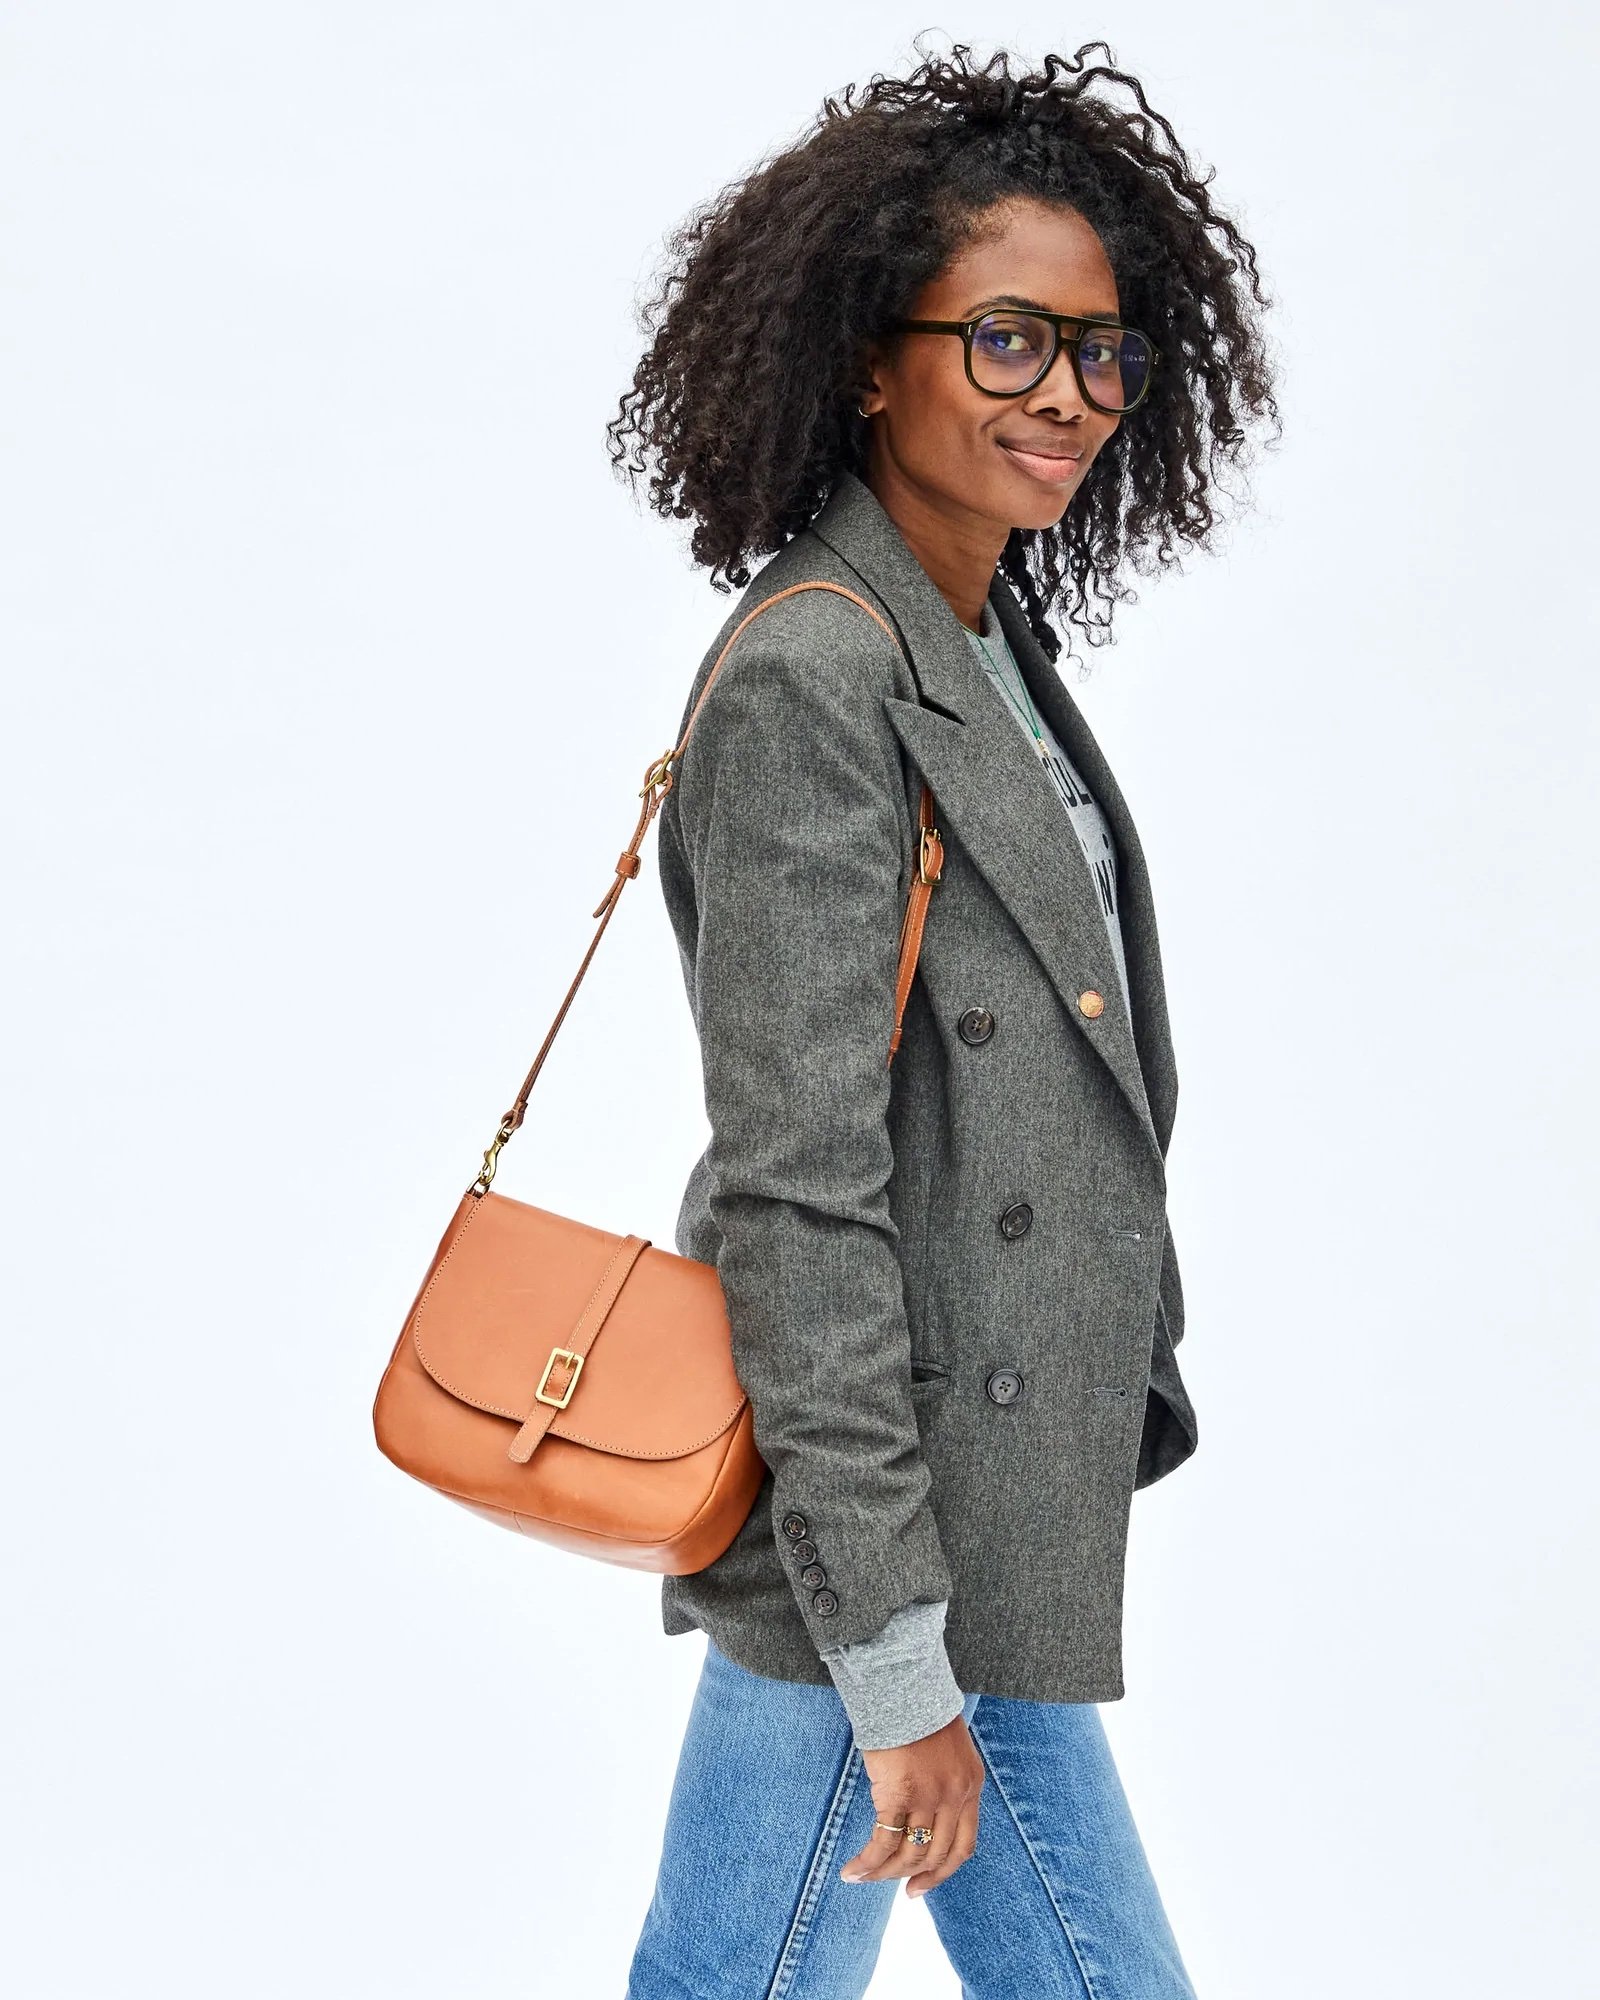 It's In the Bag: The Search for a Mom Purse